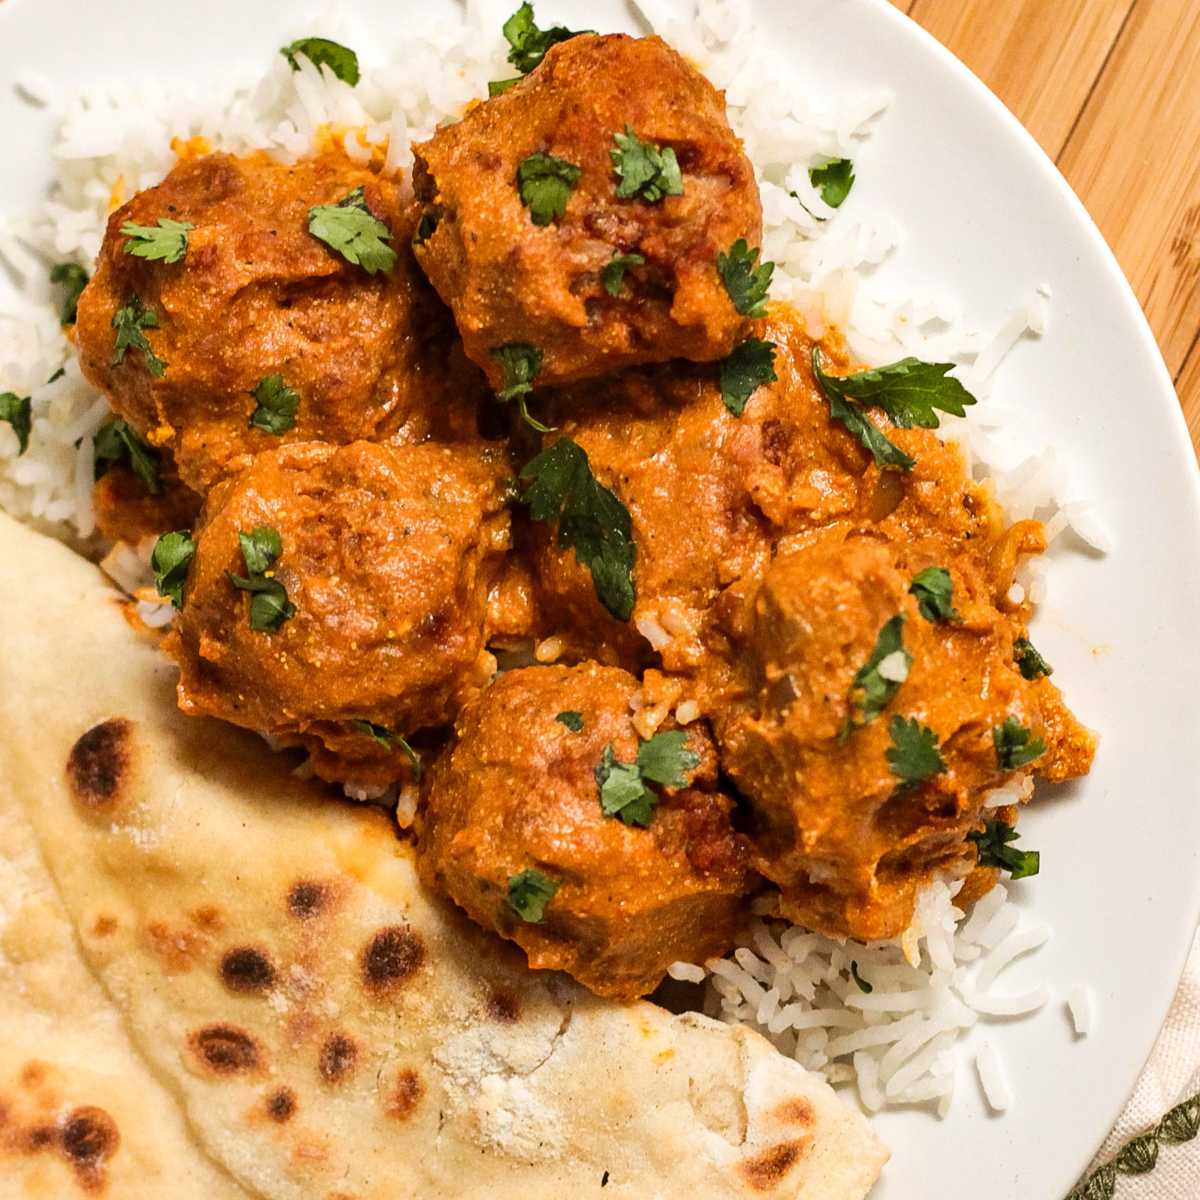 Butter chicken meatballs in a homemade butter sauce on a plate of basmati rice with naan bread on the side.